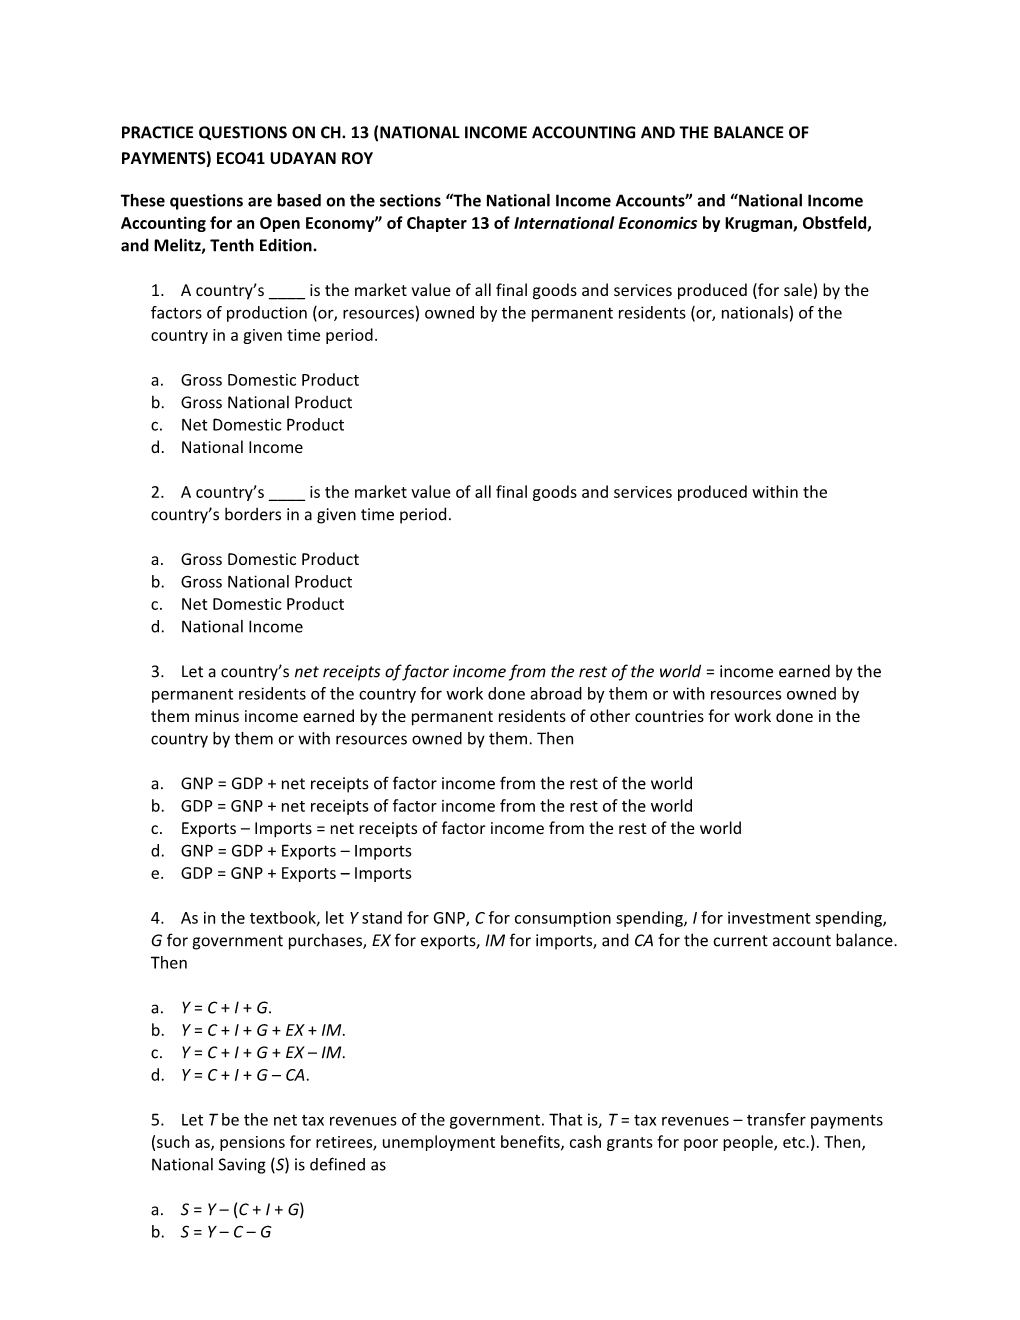 Practice Questionson Ch. 13 (National Income Accounting and the Balance of Payments) Eco41